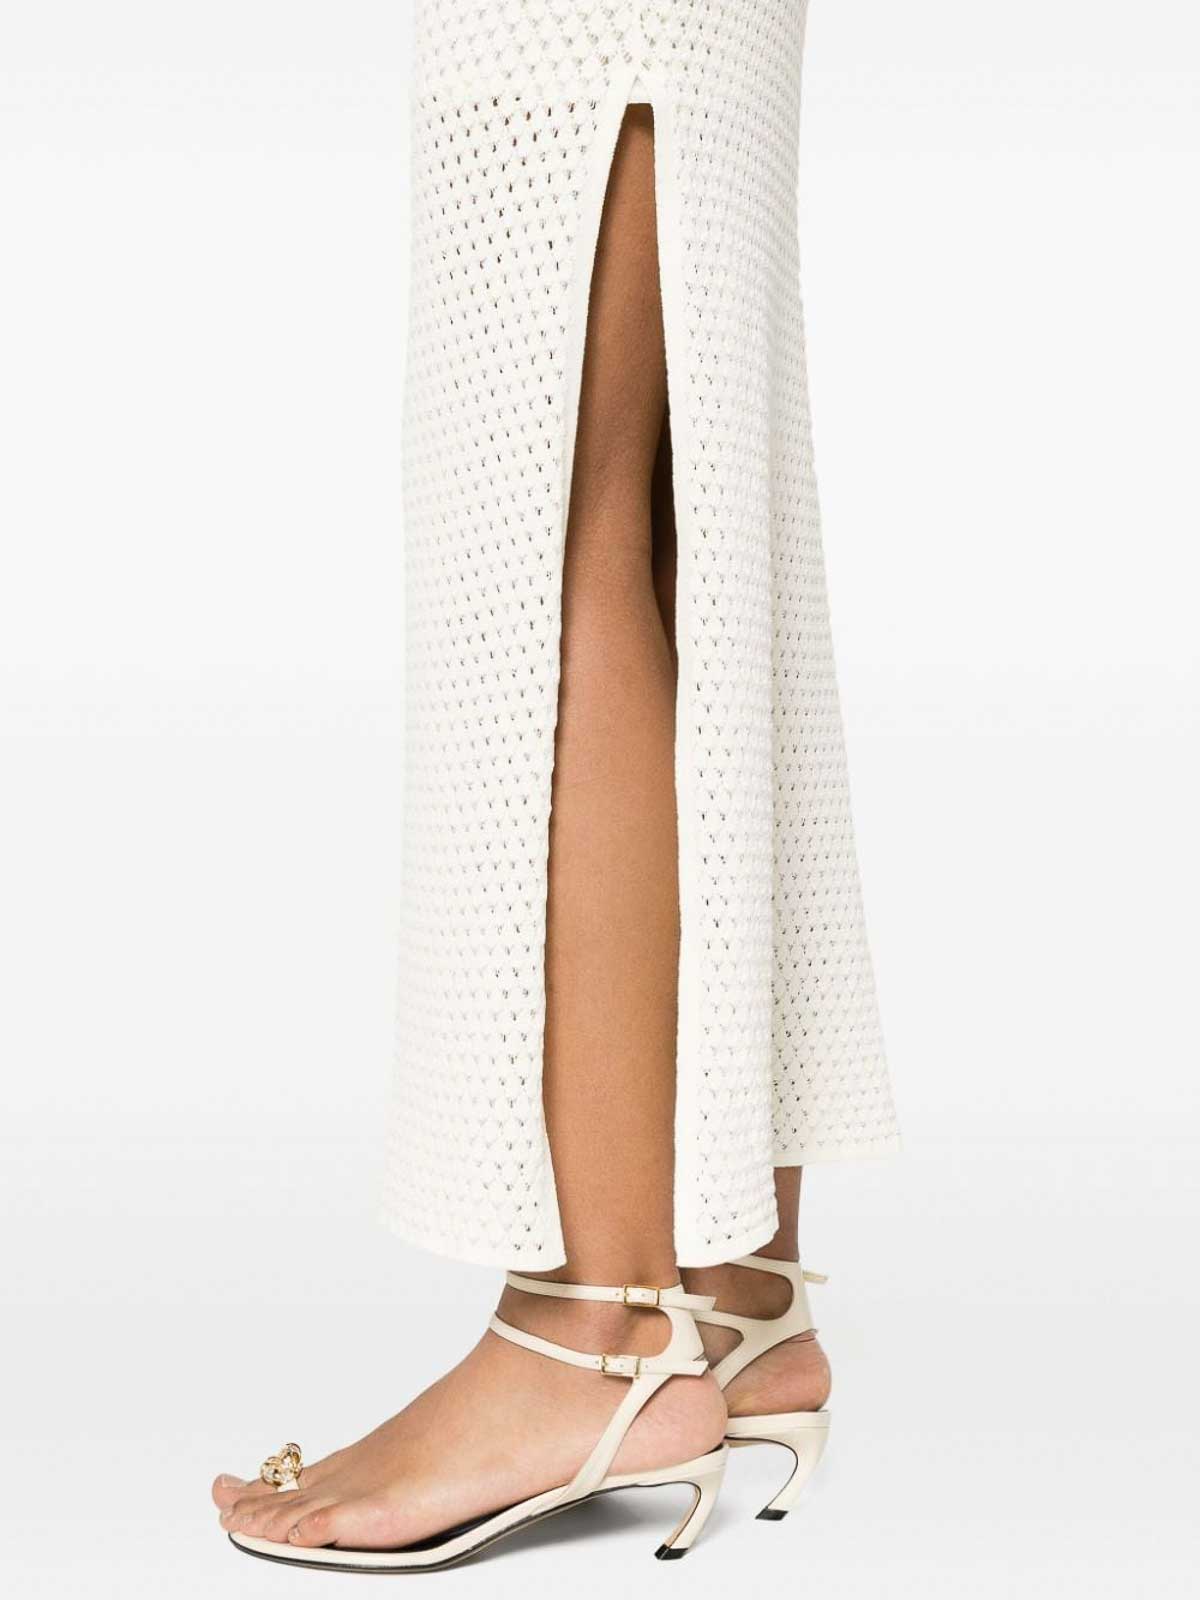 Shop Tom Ford Maxi Dress In White